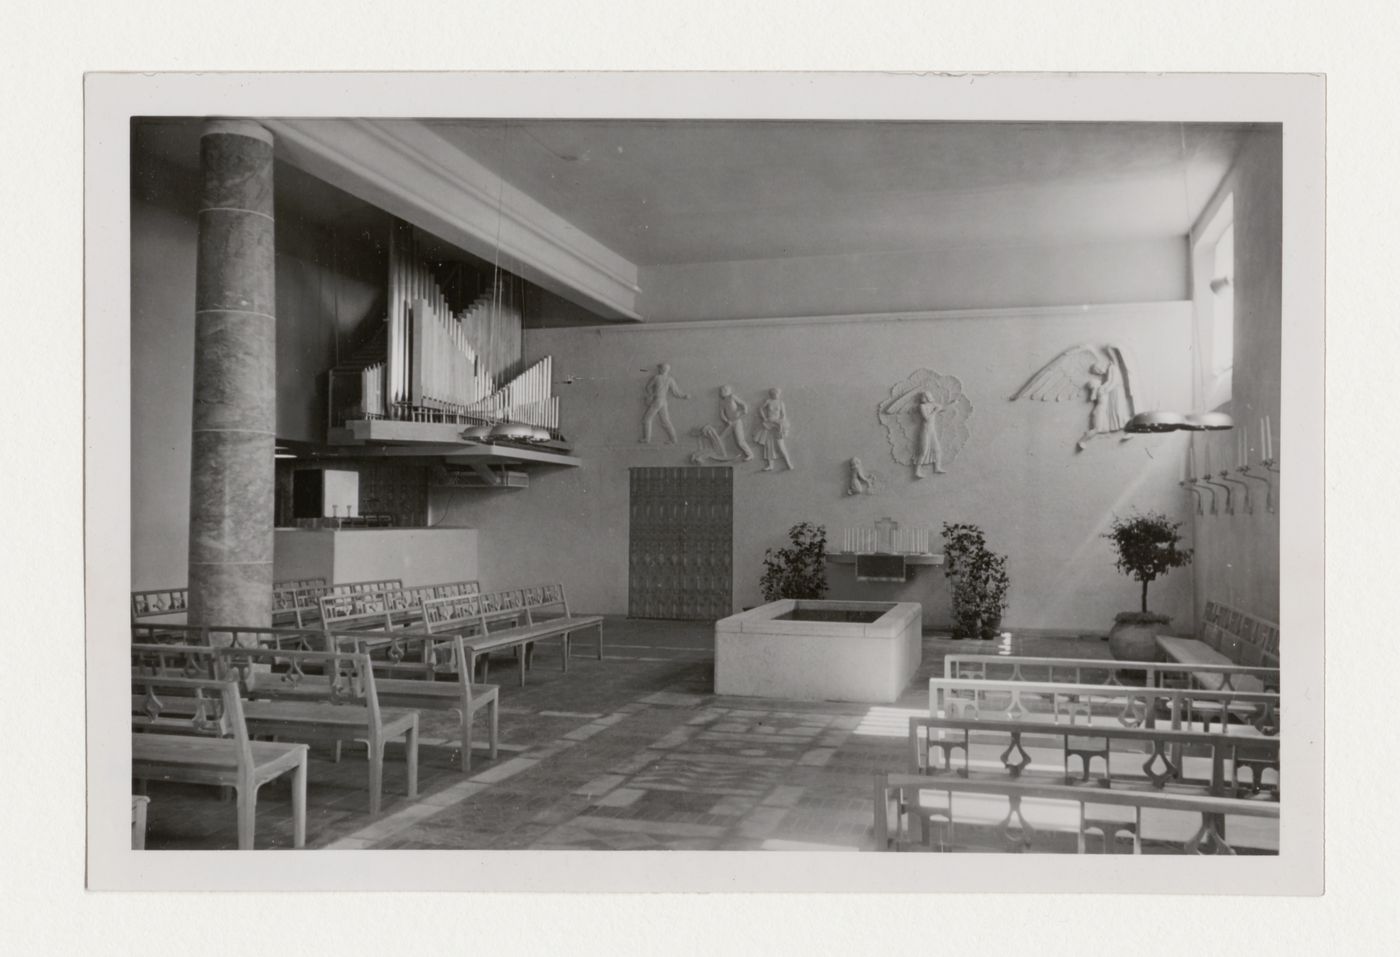 Interior view of the Chapel of Faith showing pews, organ pipes and the wall relief designed by Ivar Viktor Johnsson, Woodland Crematorium and Cemetery, Stockholm